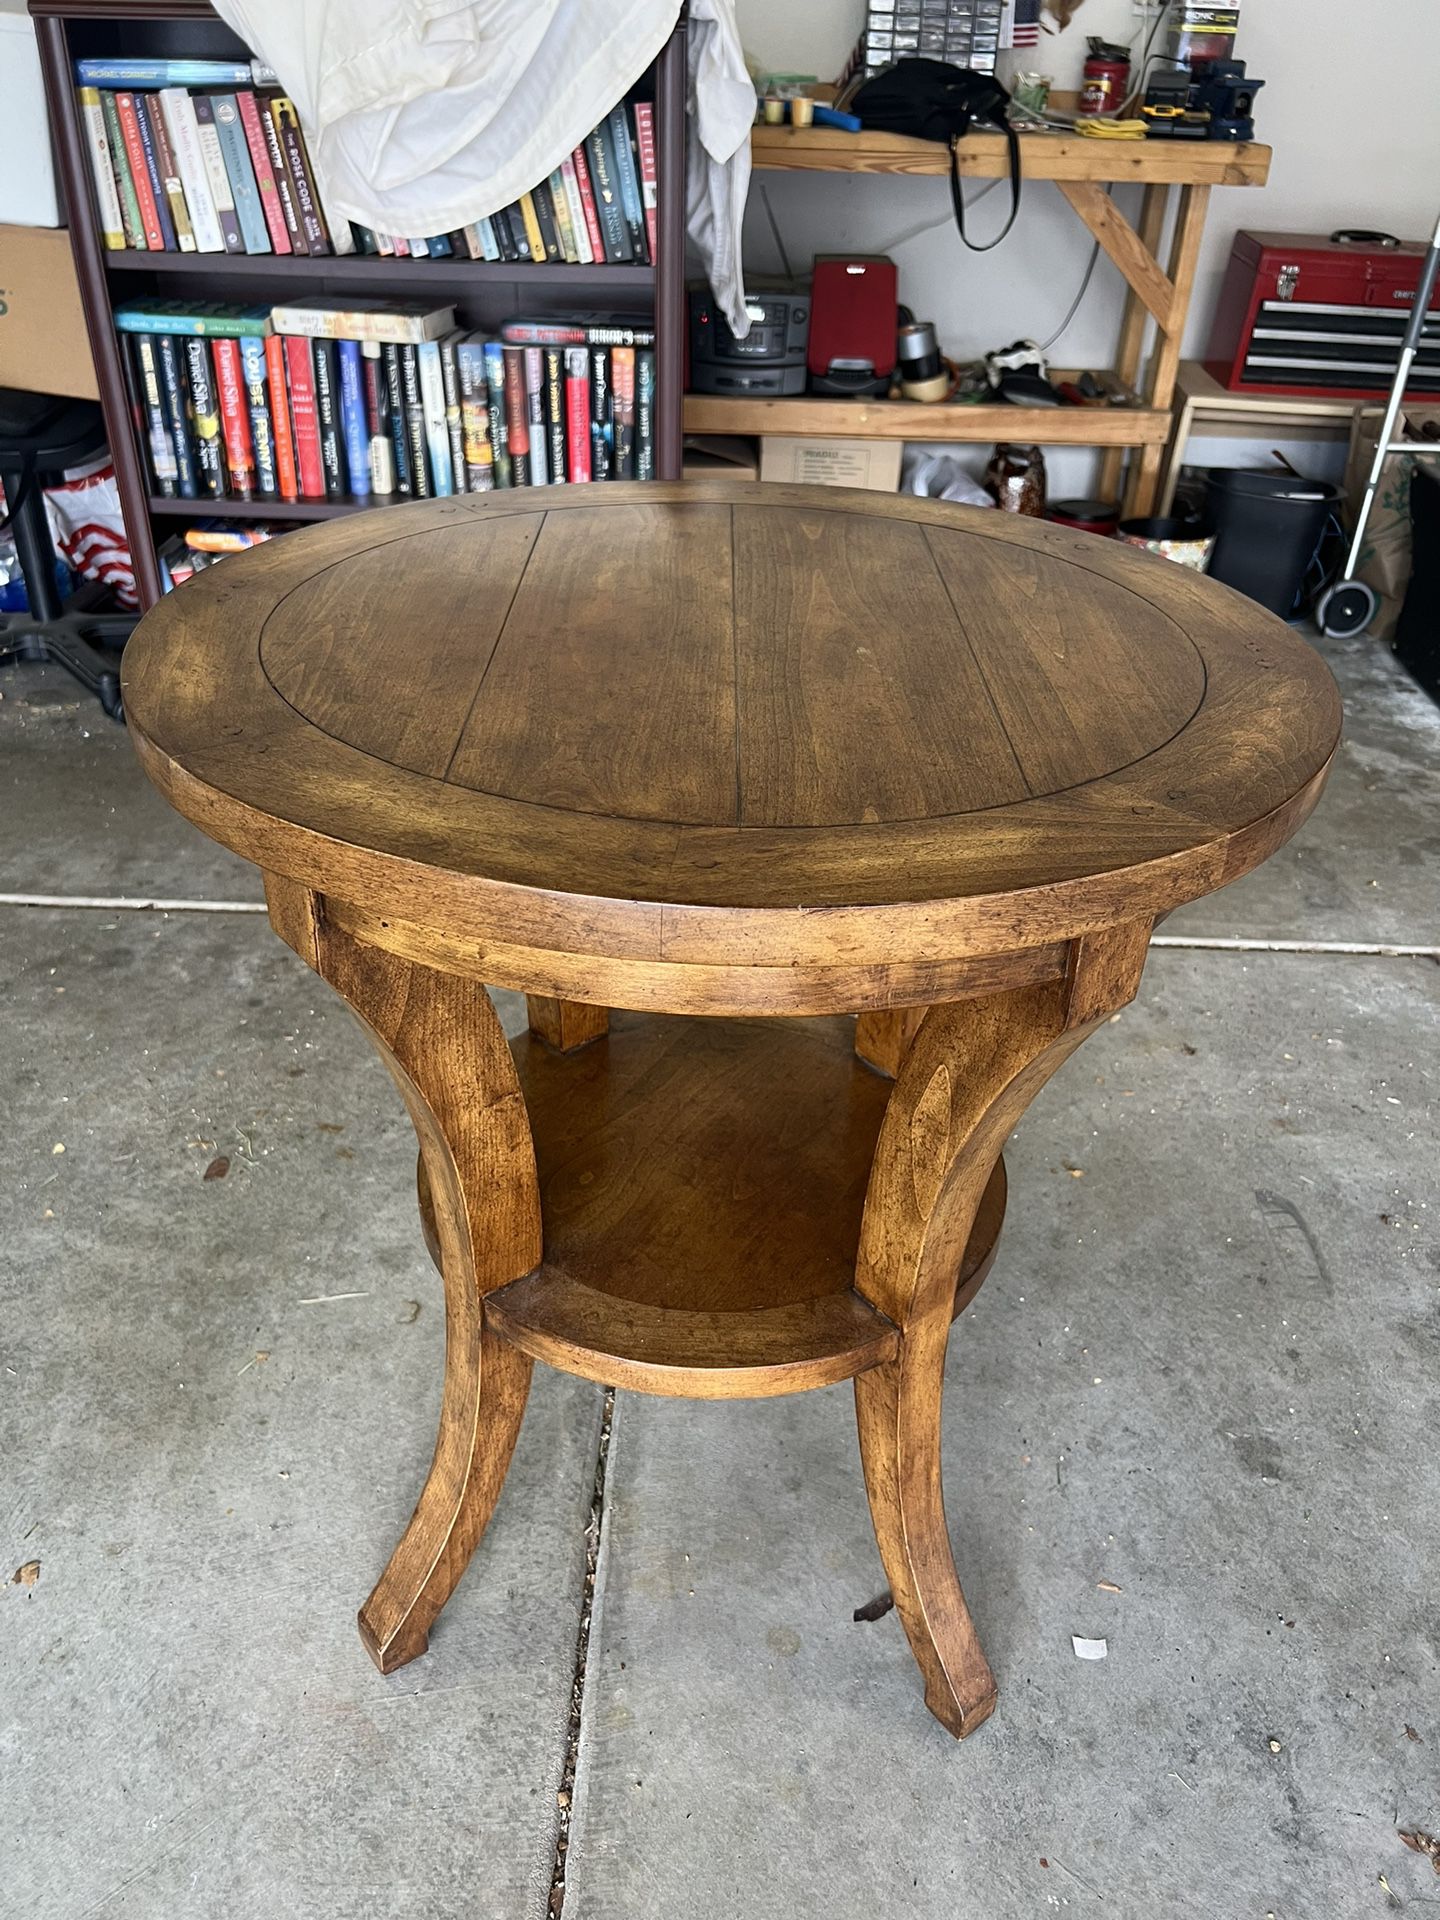 Heavy, Real Wooden Table / Side Table 